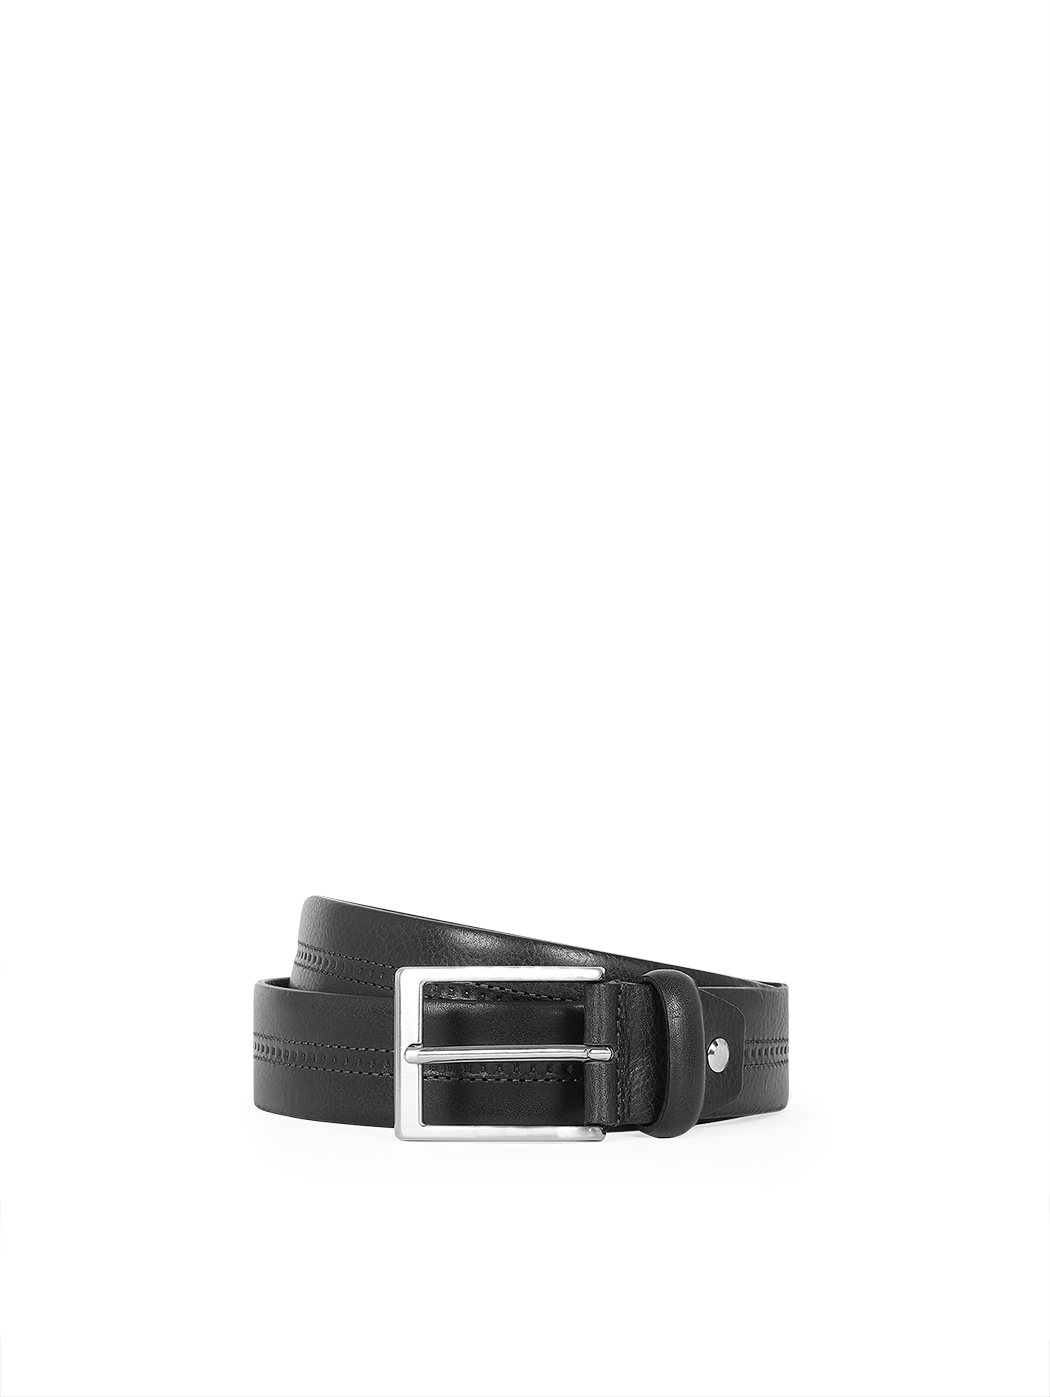 Classic Italian Belt For Man With Stitching Black